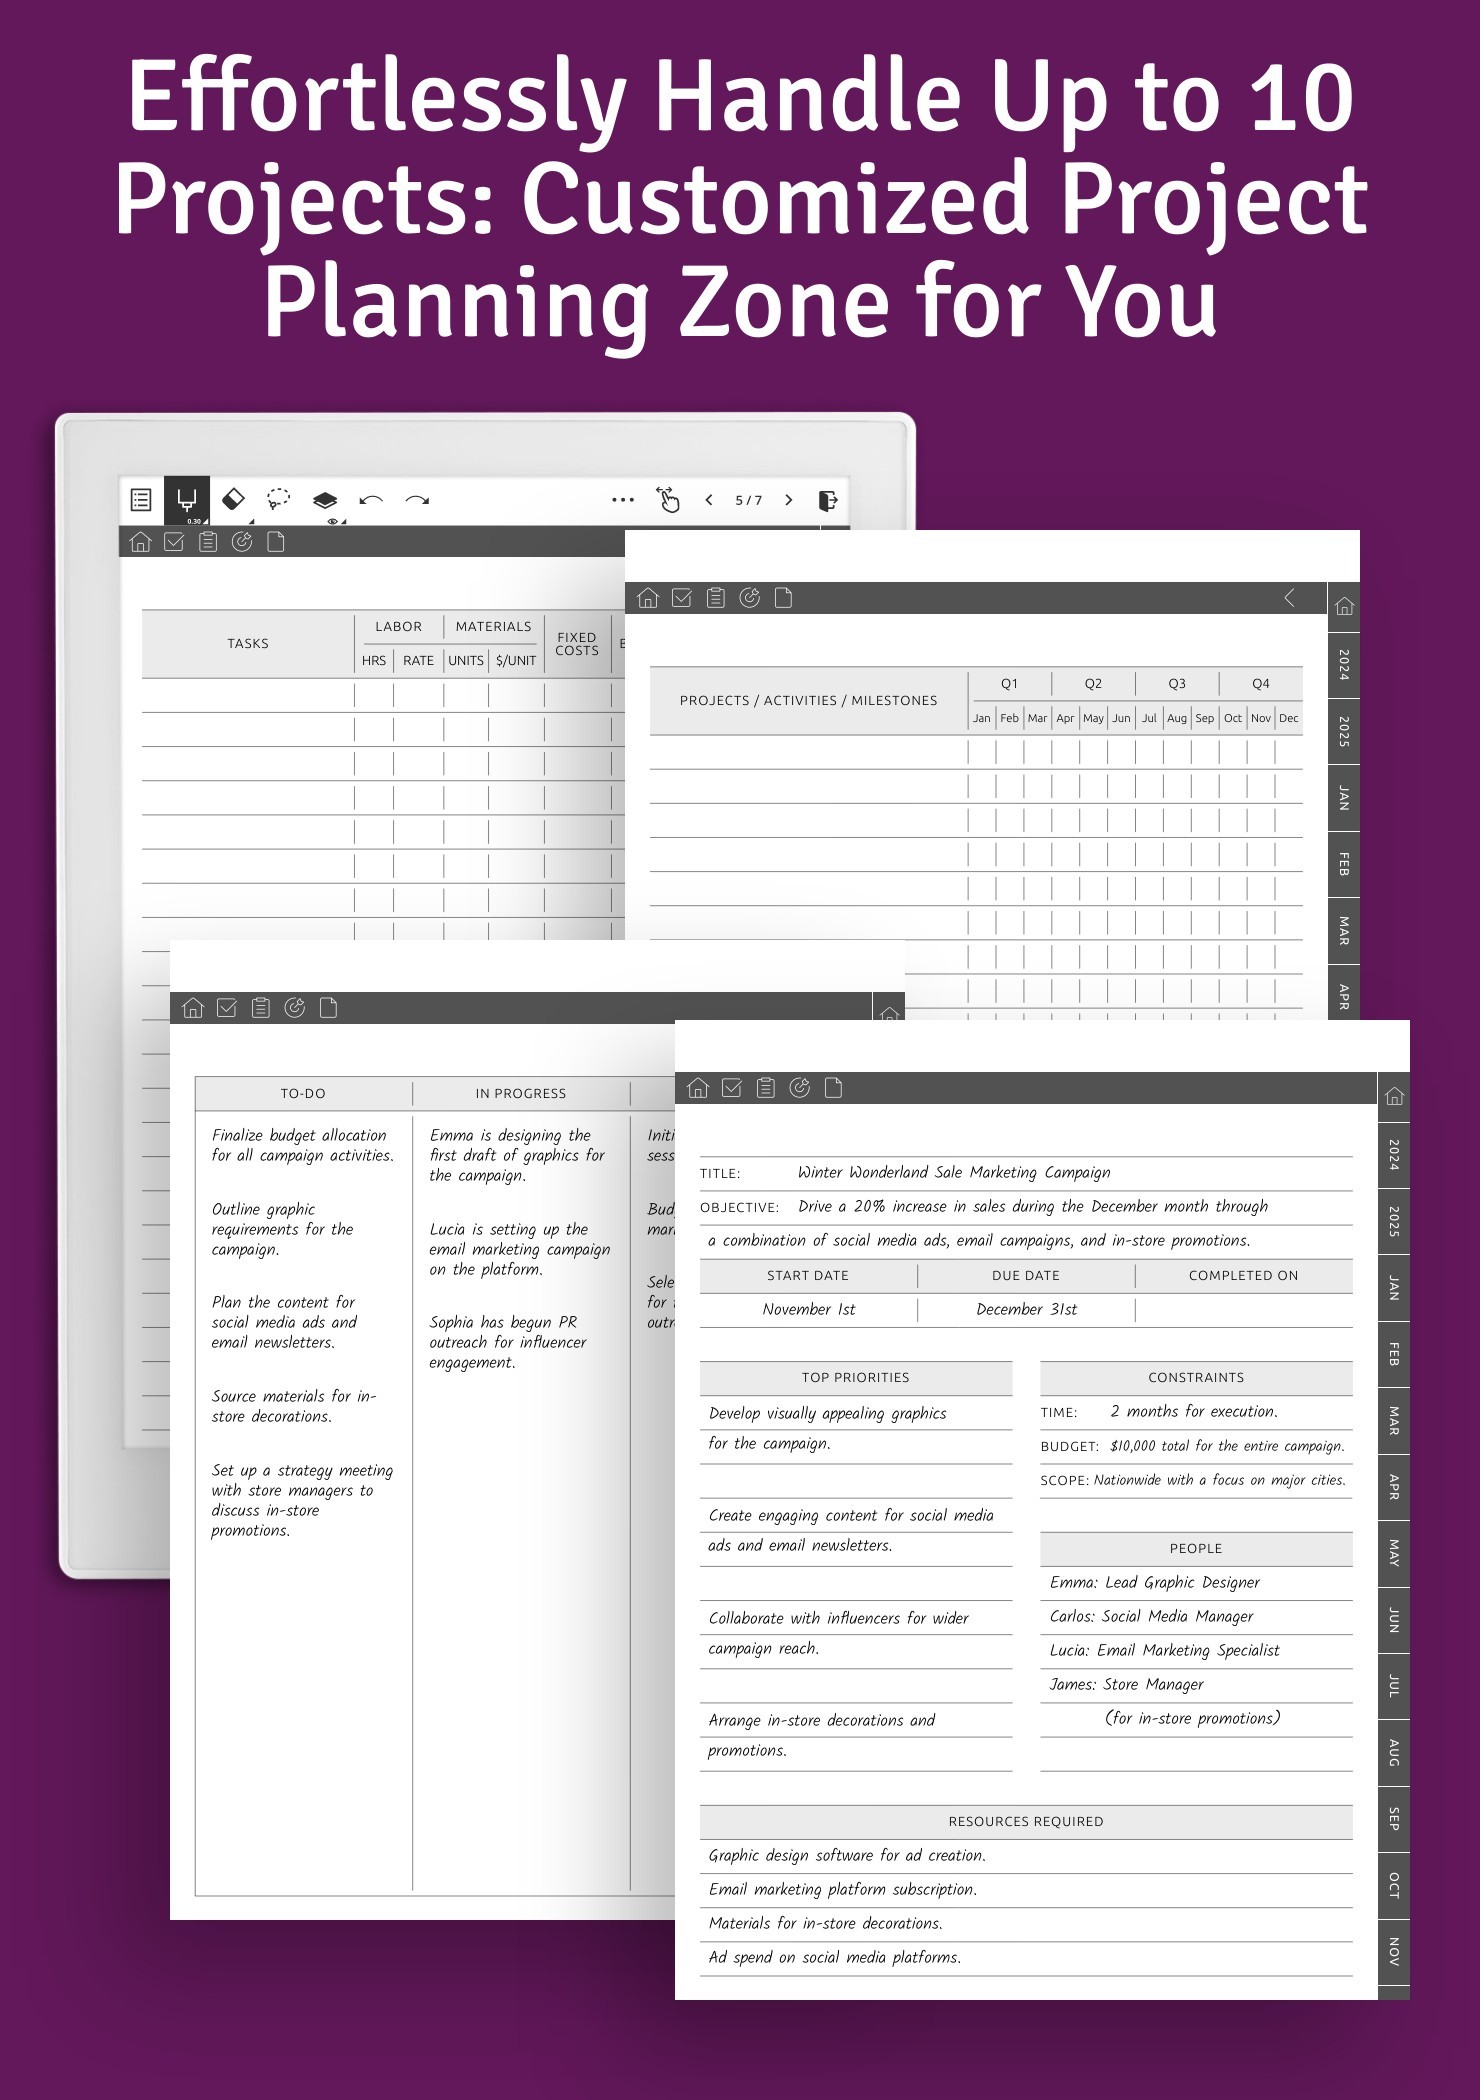 Manage 10 Projects with Ease: Tailored Project Planning Space